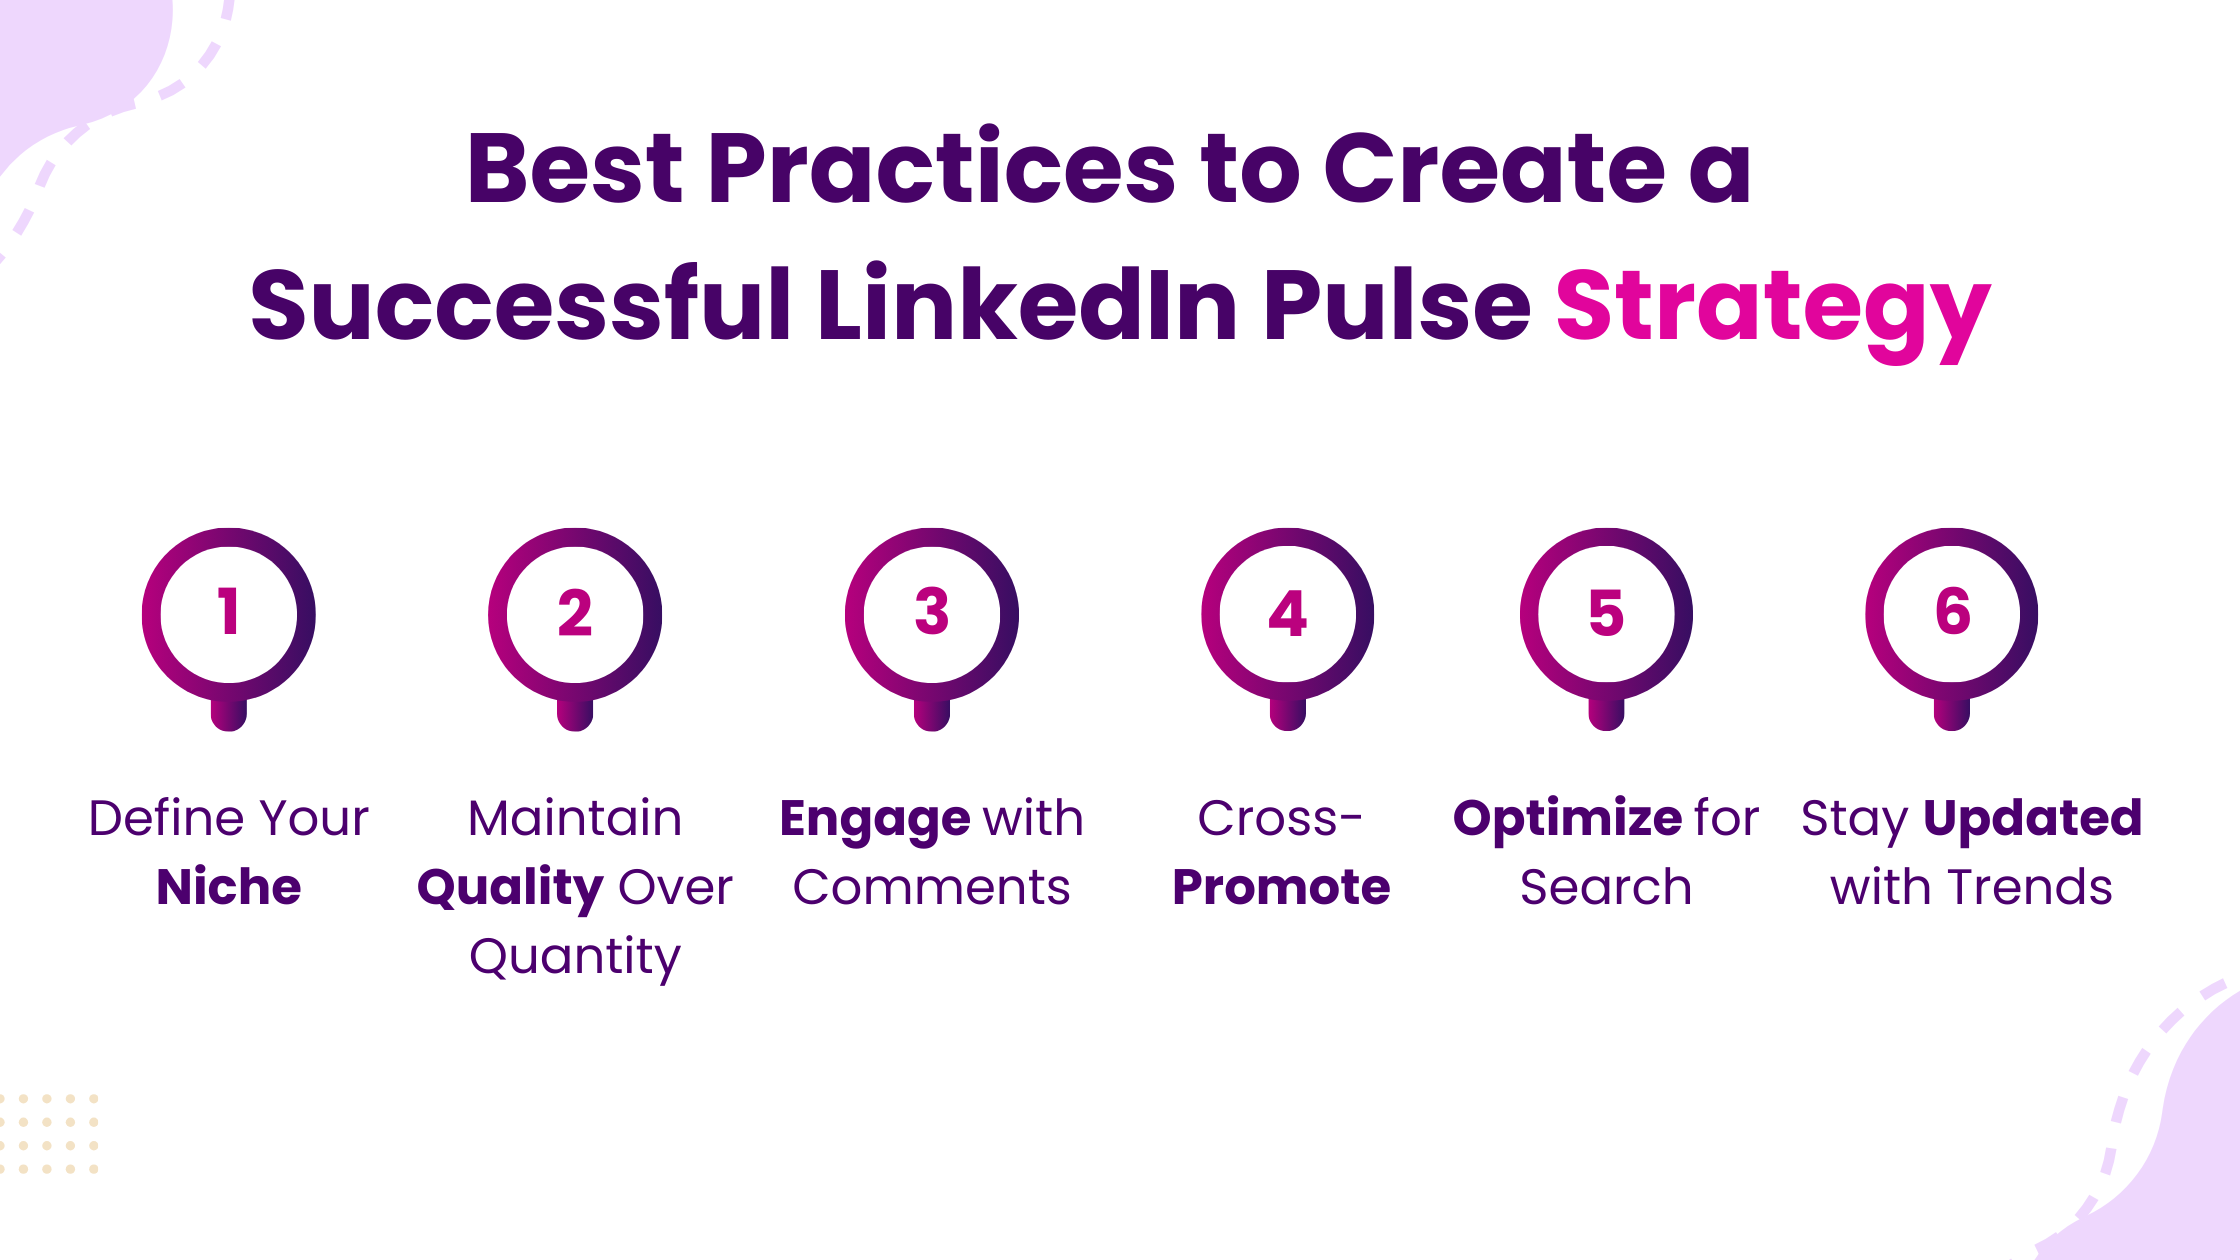 Best Practices to Create a Successful LinkedIn Pulse Strategy